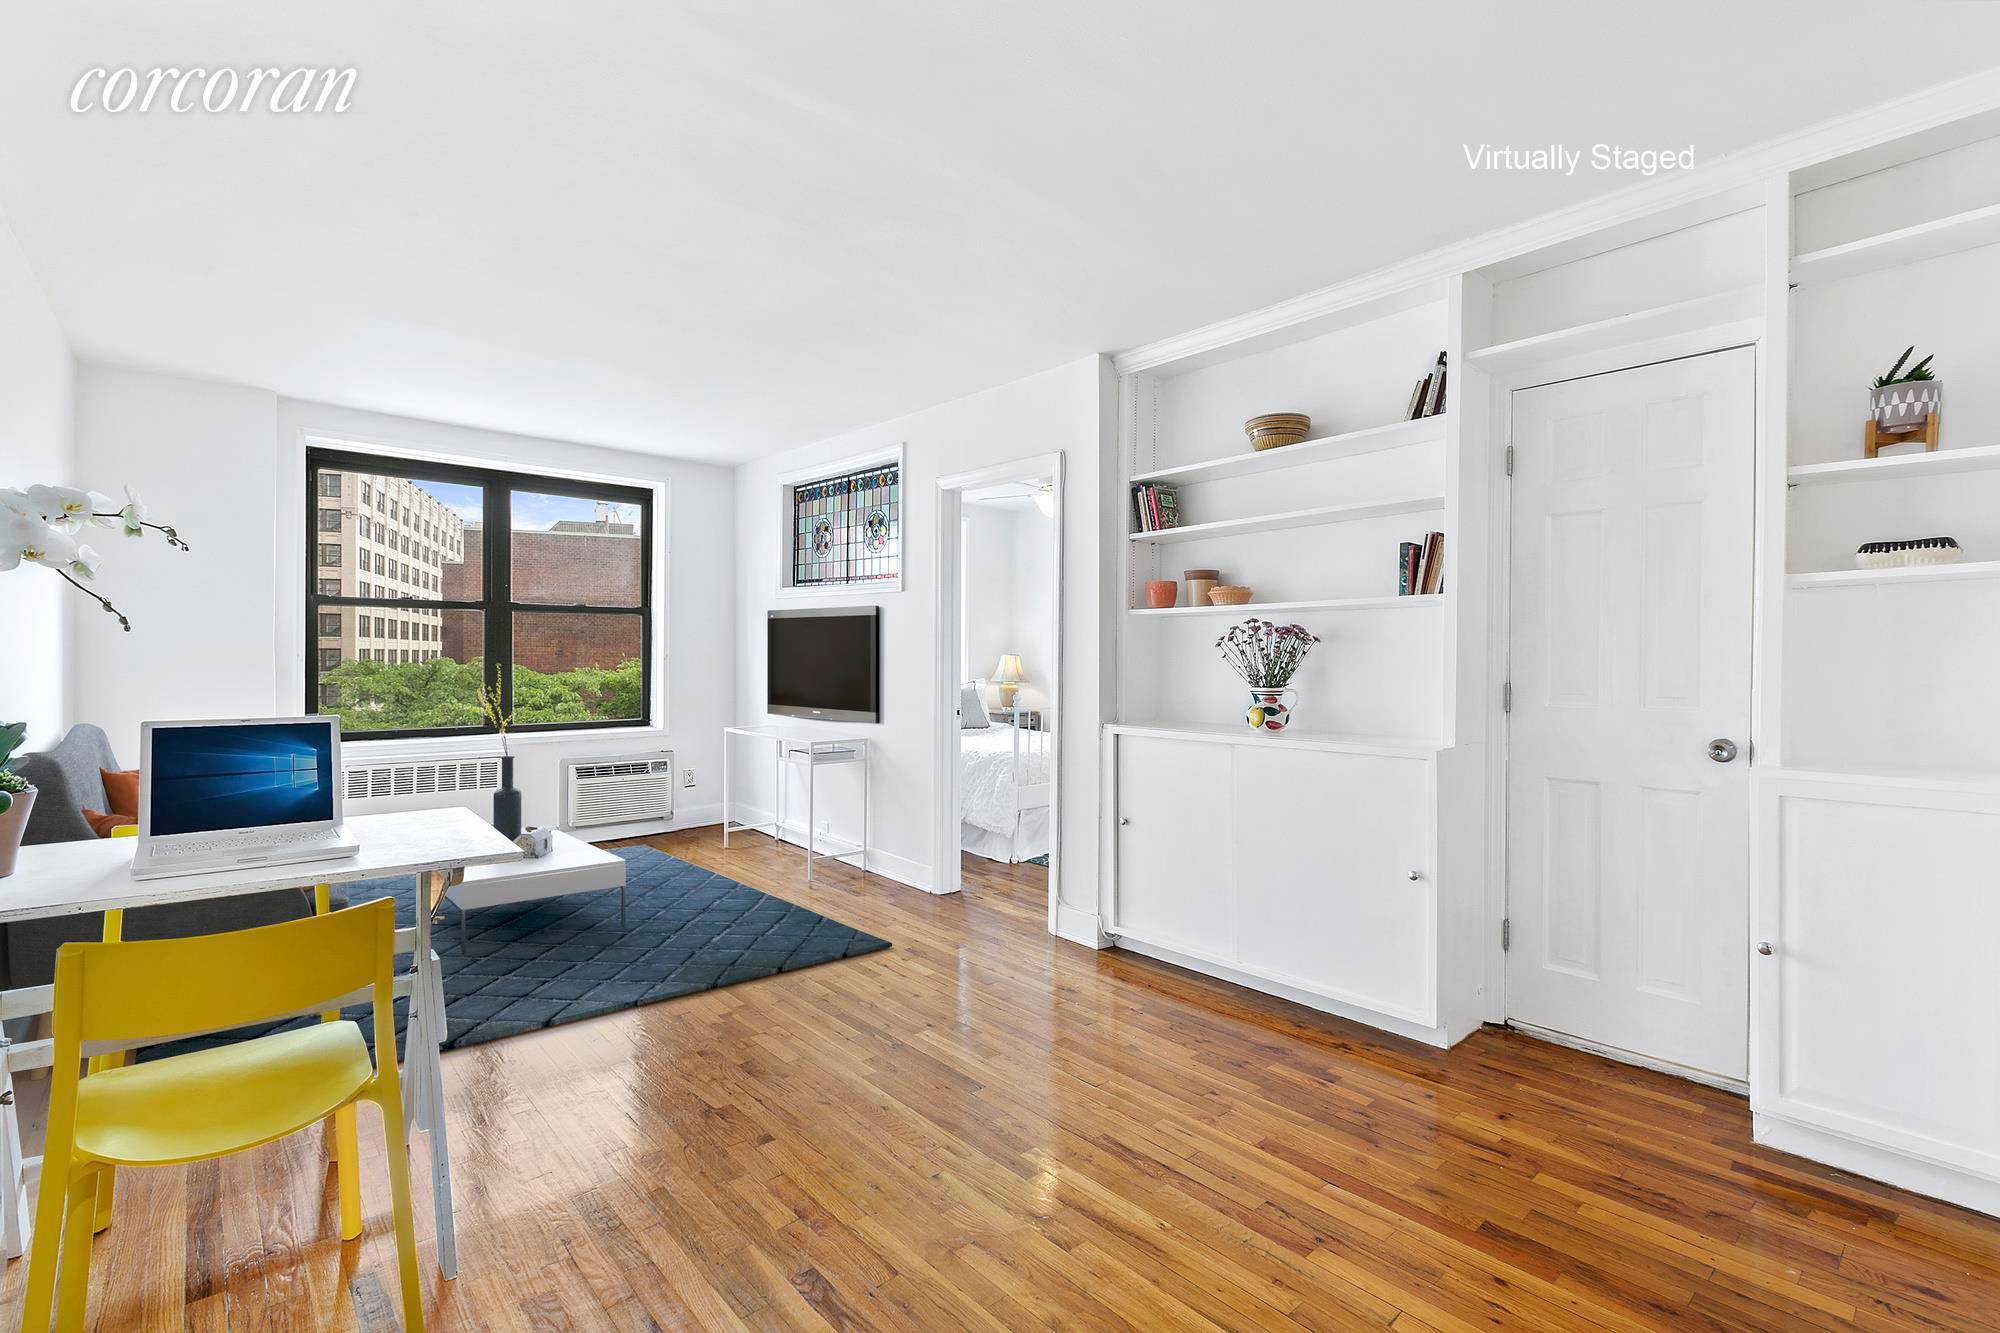 Attention Investors and End Users perfectly located, 165 Christopher Street 4H is a West Village beautifully renovated, Jr.